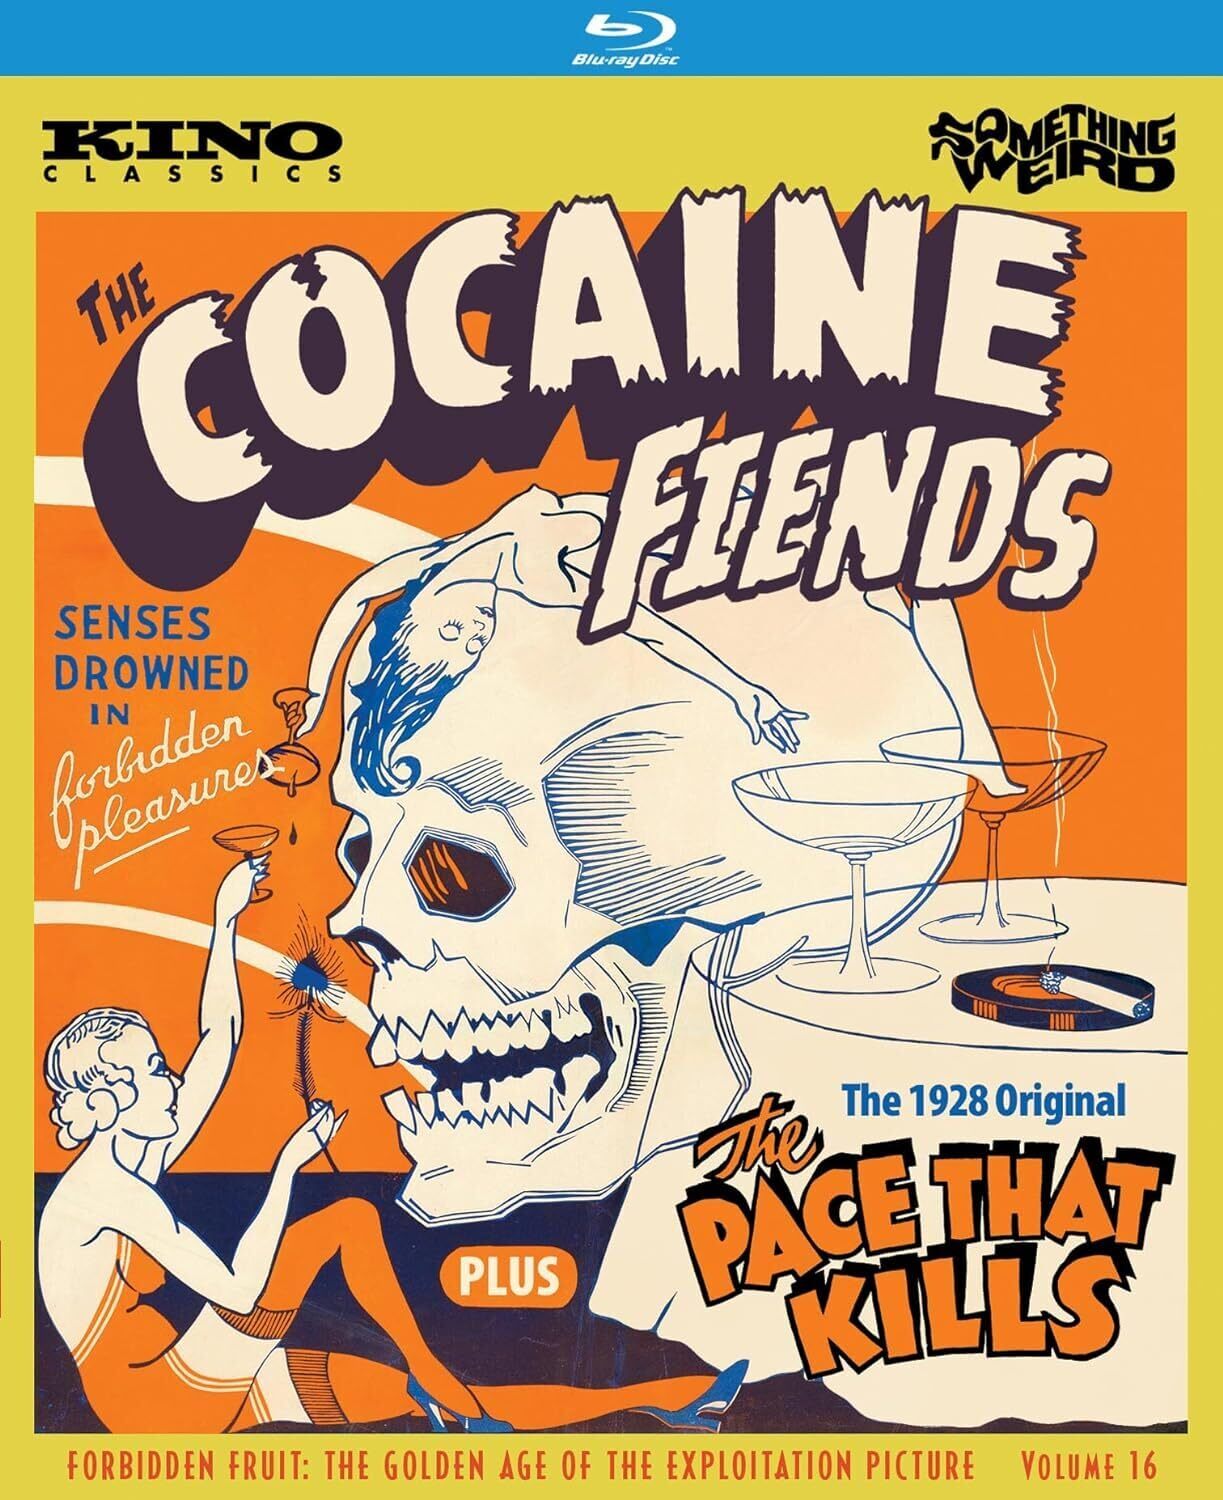 THE COCAINE FIENDS / THE PACE THAT KILLS BLU-RAY [PRE-ORDER]